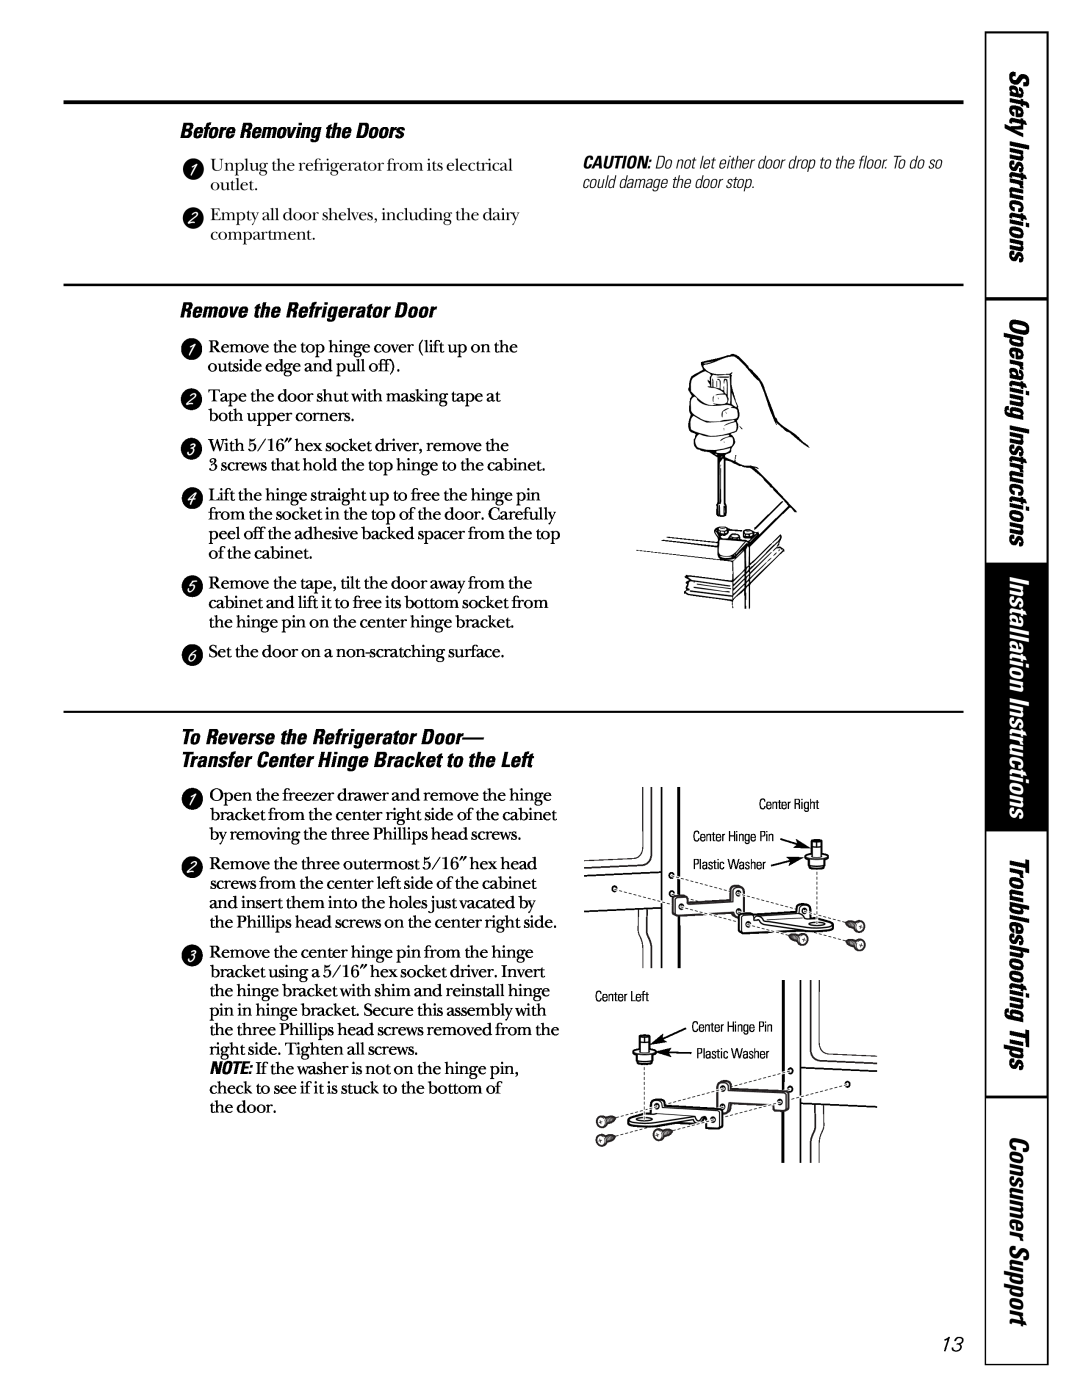 GE Model 21 Safety Instructions Operating Instructions Installation, Instructions Troubleshooting Tips Consumer Support 